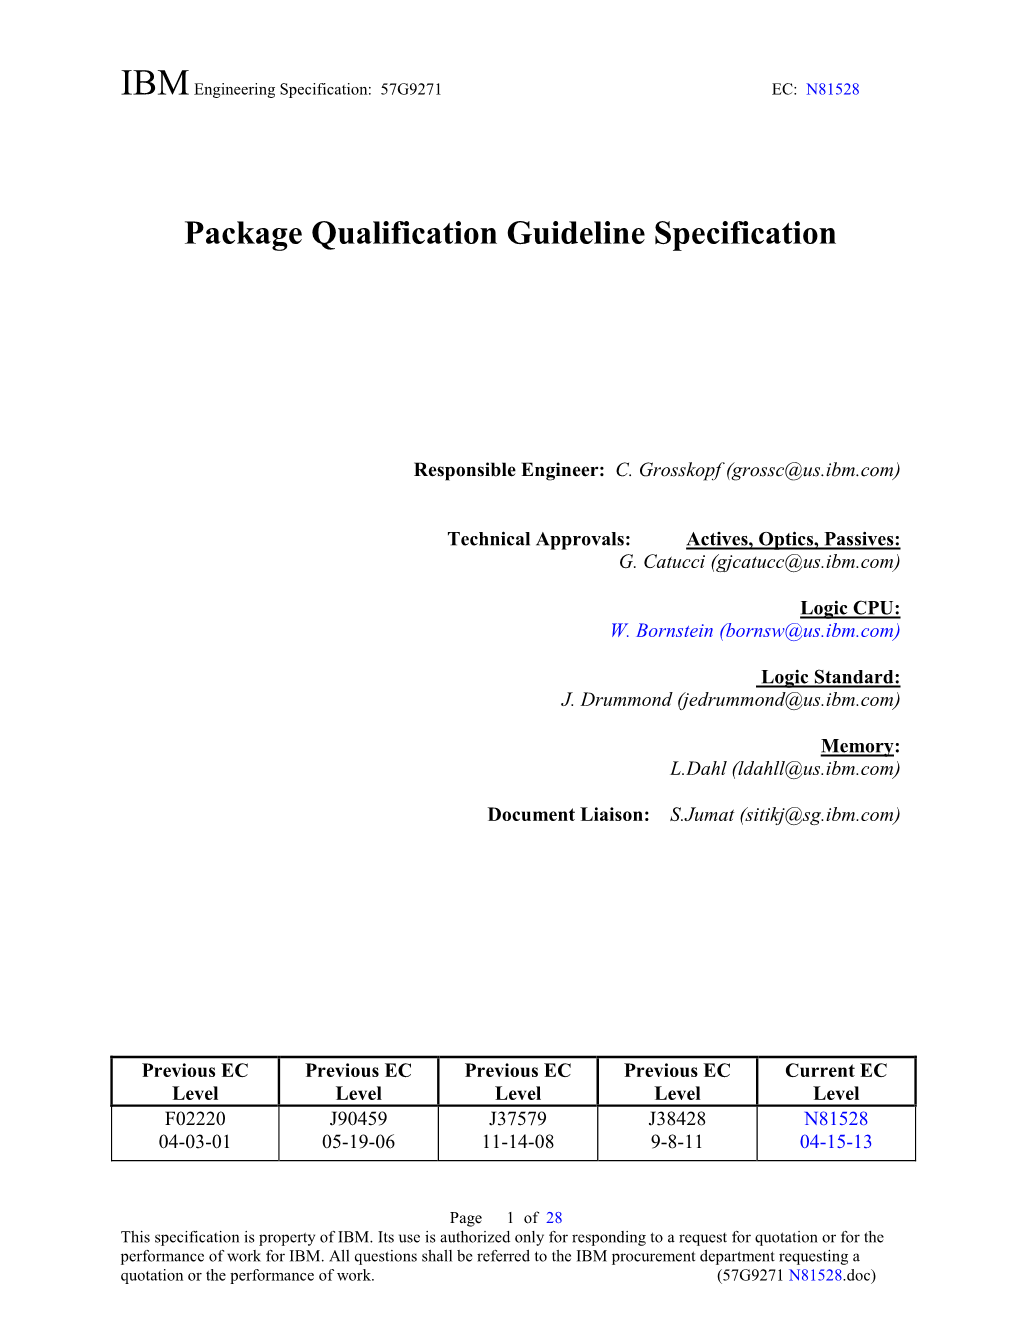 Package Qualification Guideline Specification